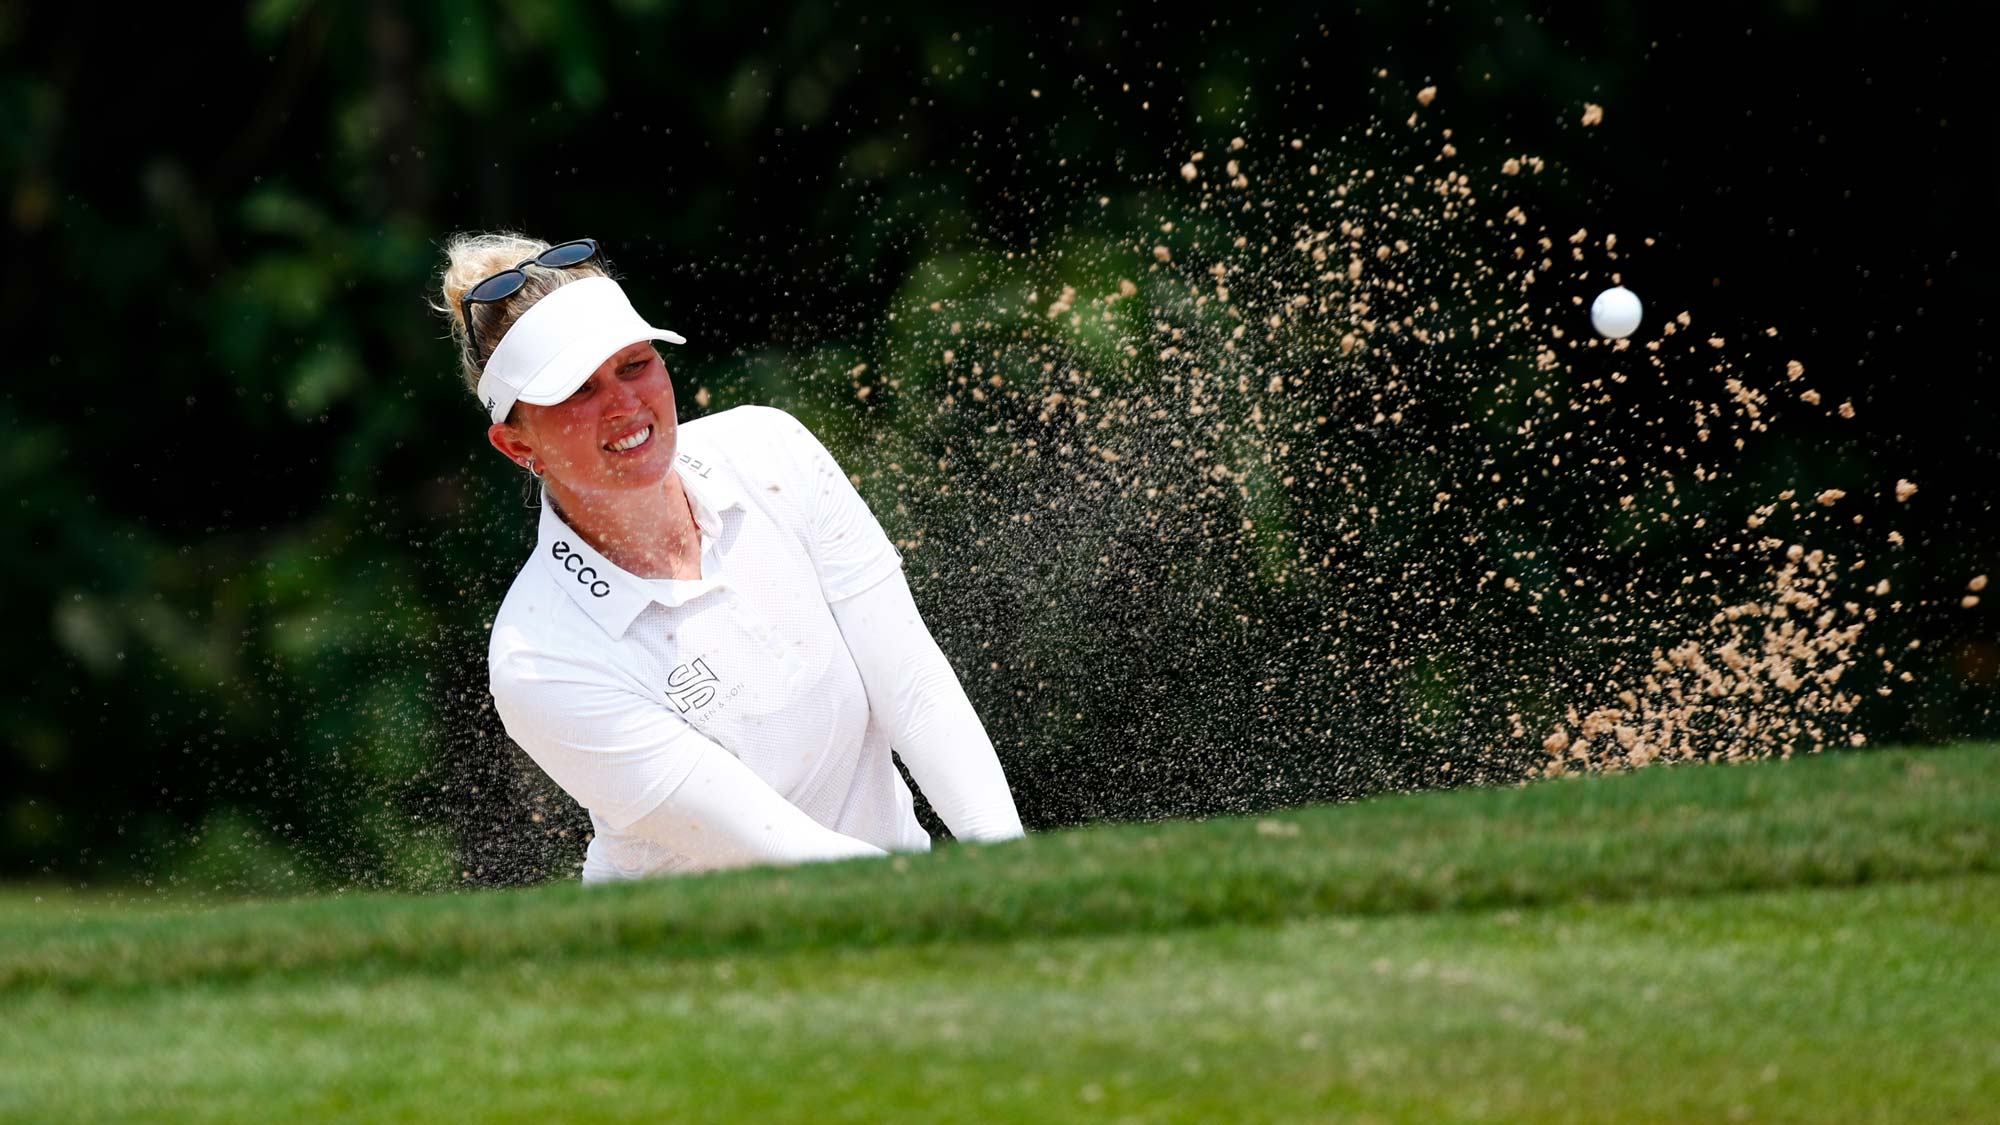 Nanna Koerstz Madsen of Denmark plays her fourth shot out of a bunker on the 7th hole during the final round of Honda LPGA Thailand